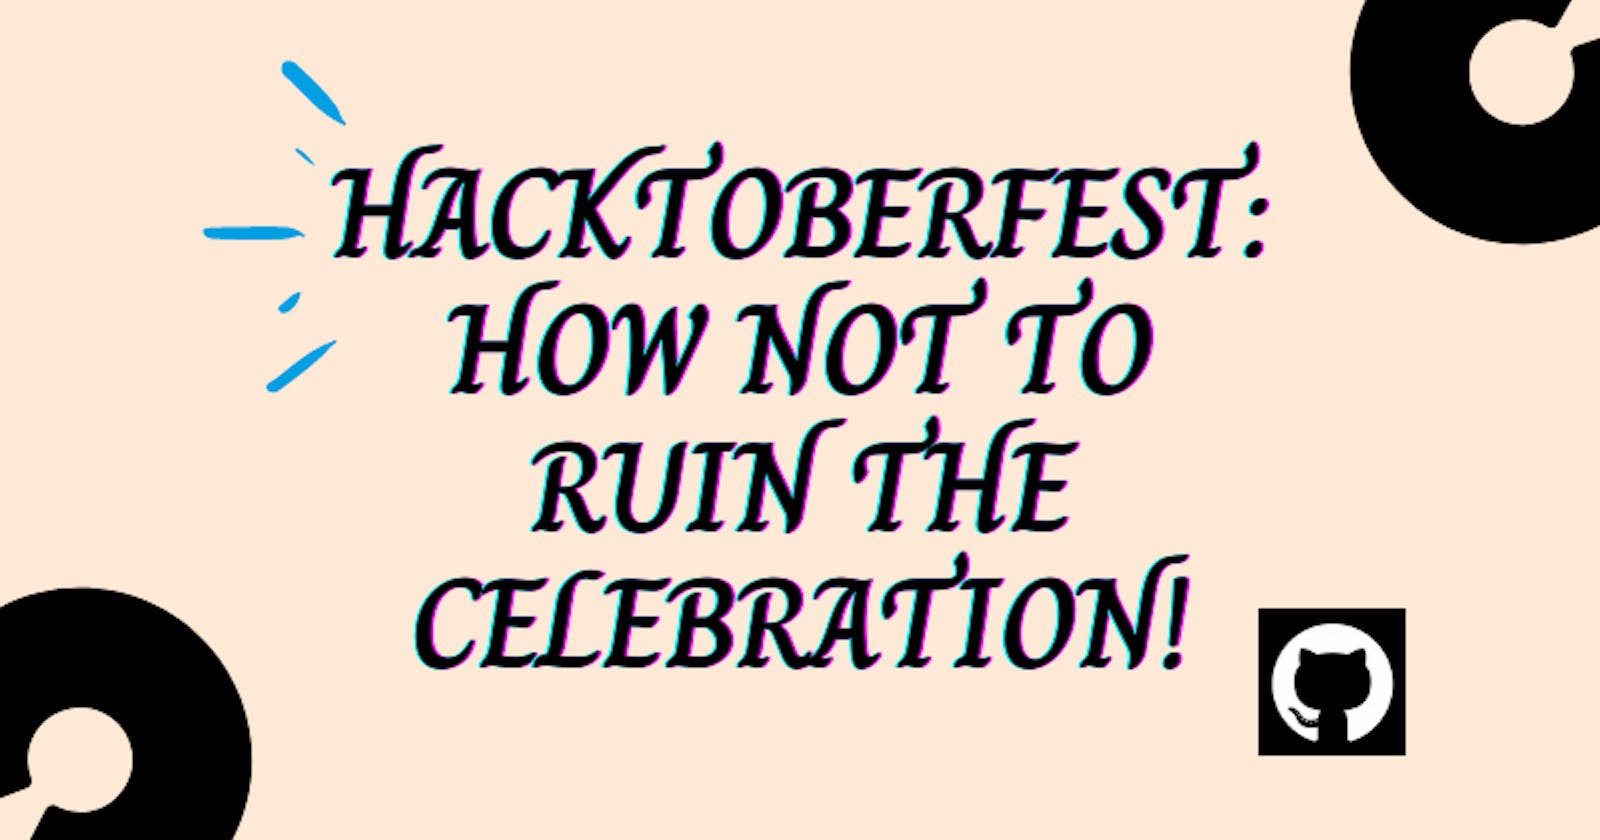 Hacktoberfest: How not to ruin the celebration!